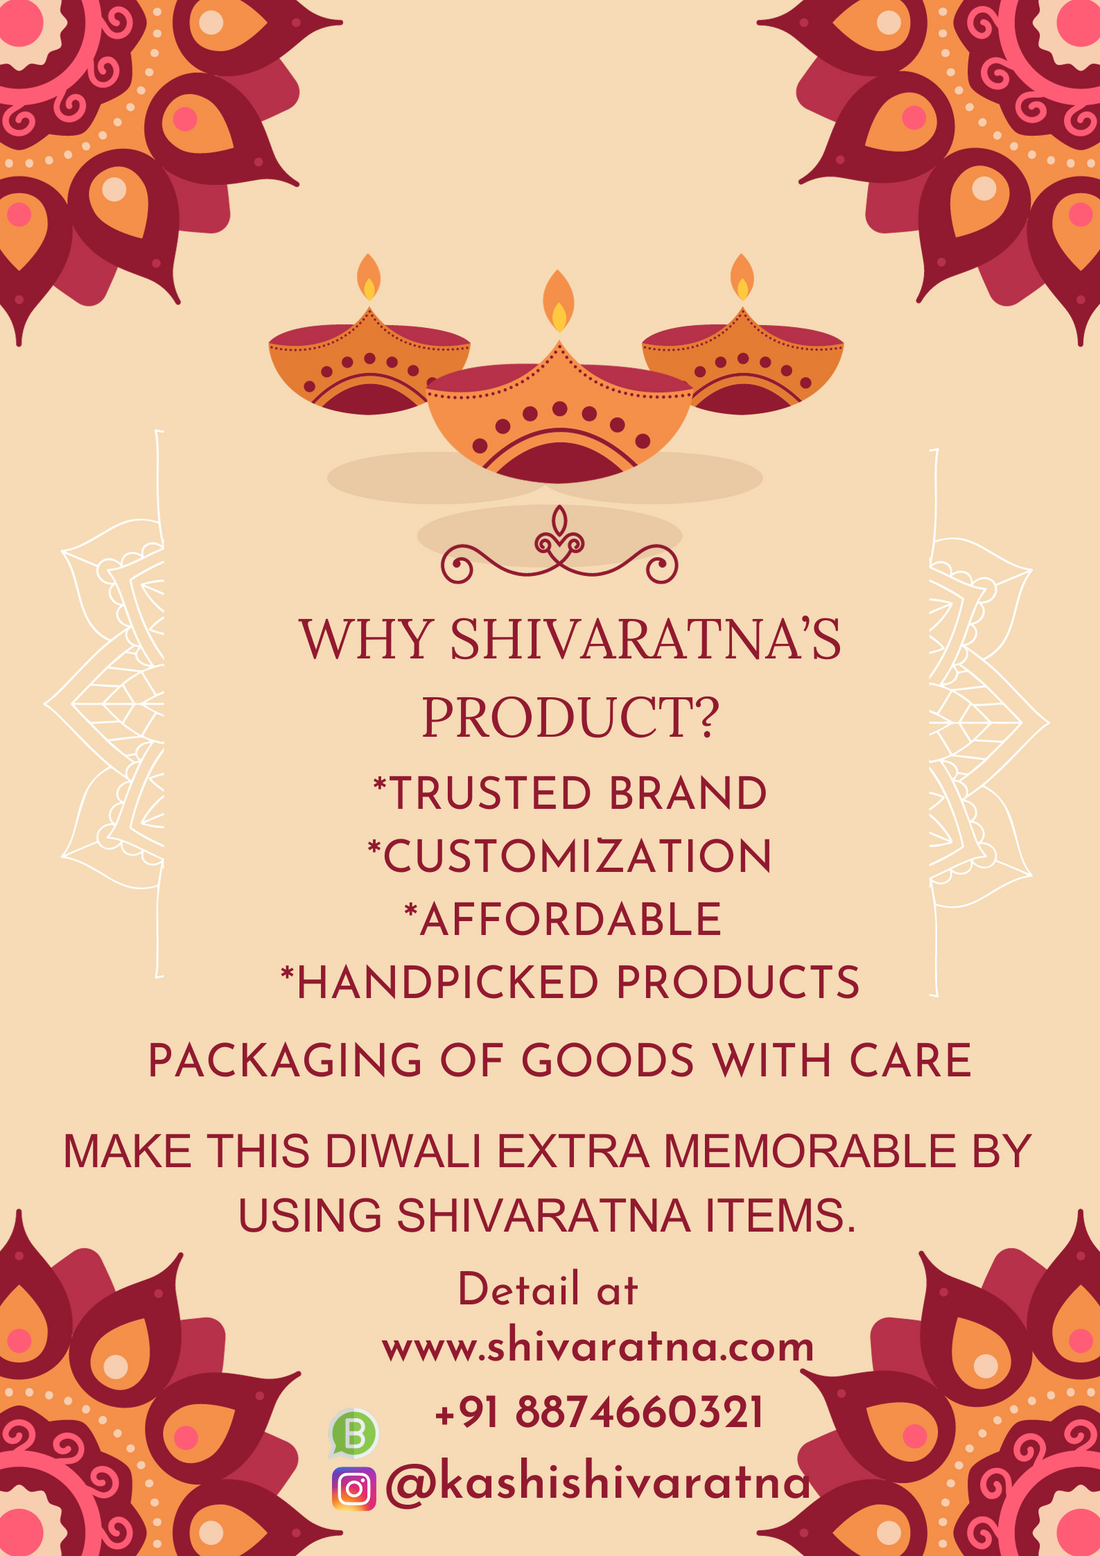 Spread Joy and Celebrate Diwali with Our Affordable Customizable Product